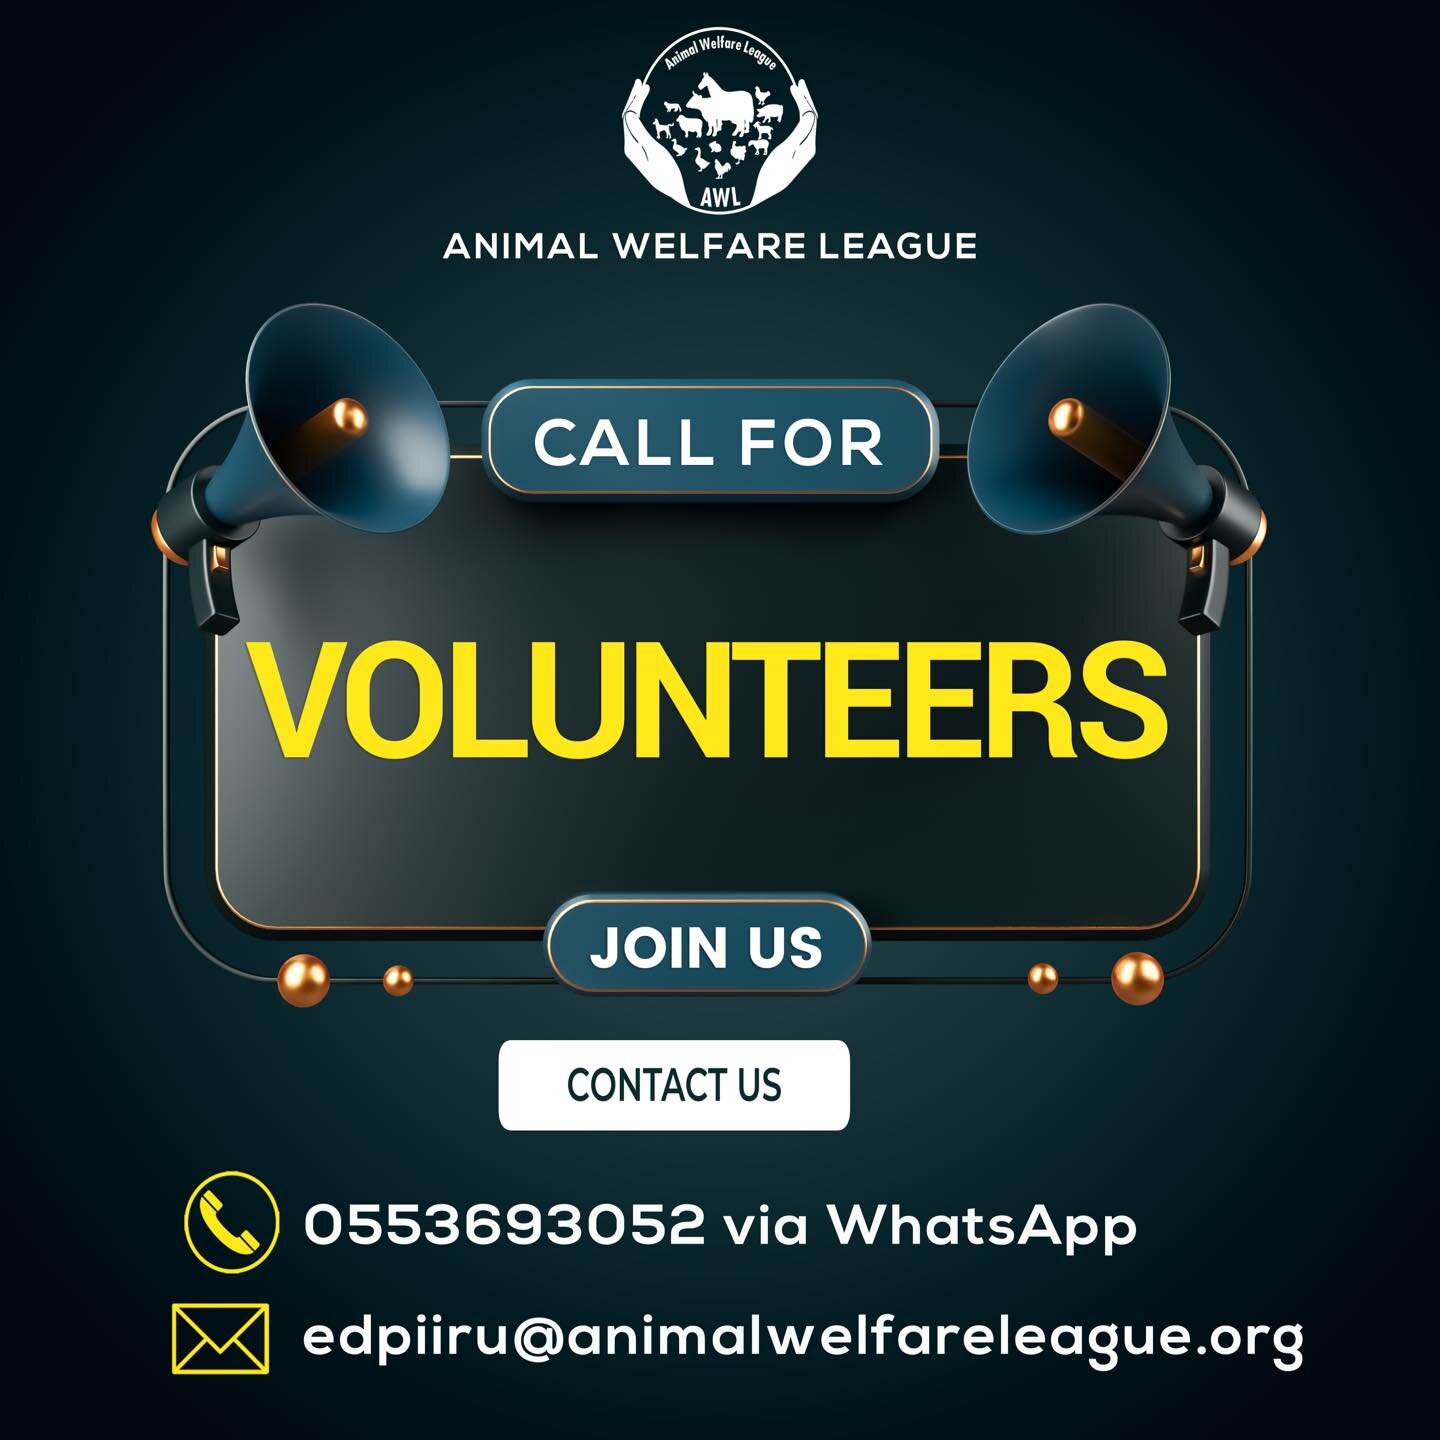 Join us to take actions for animals